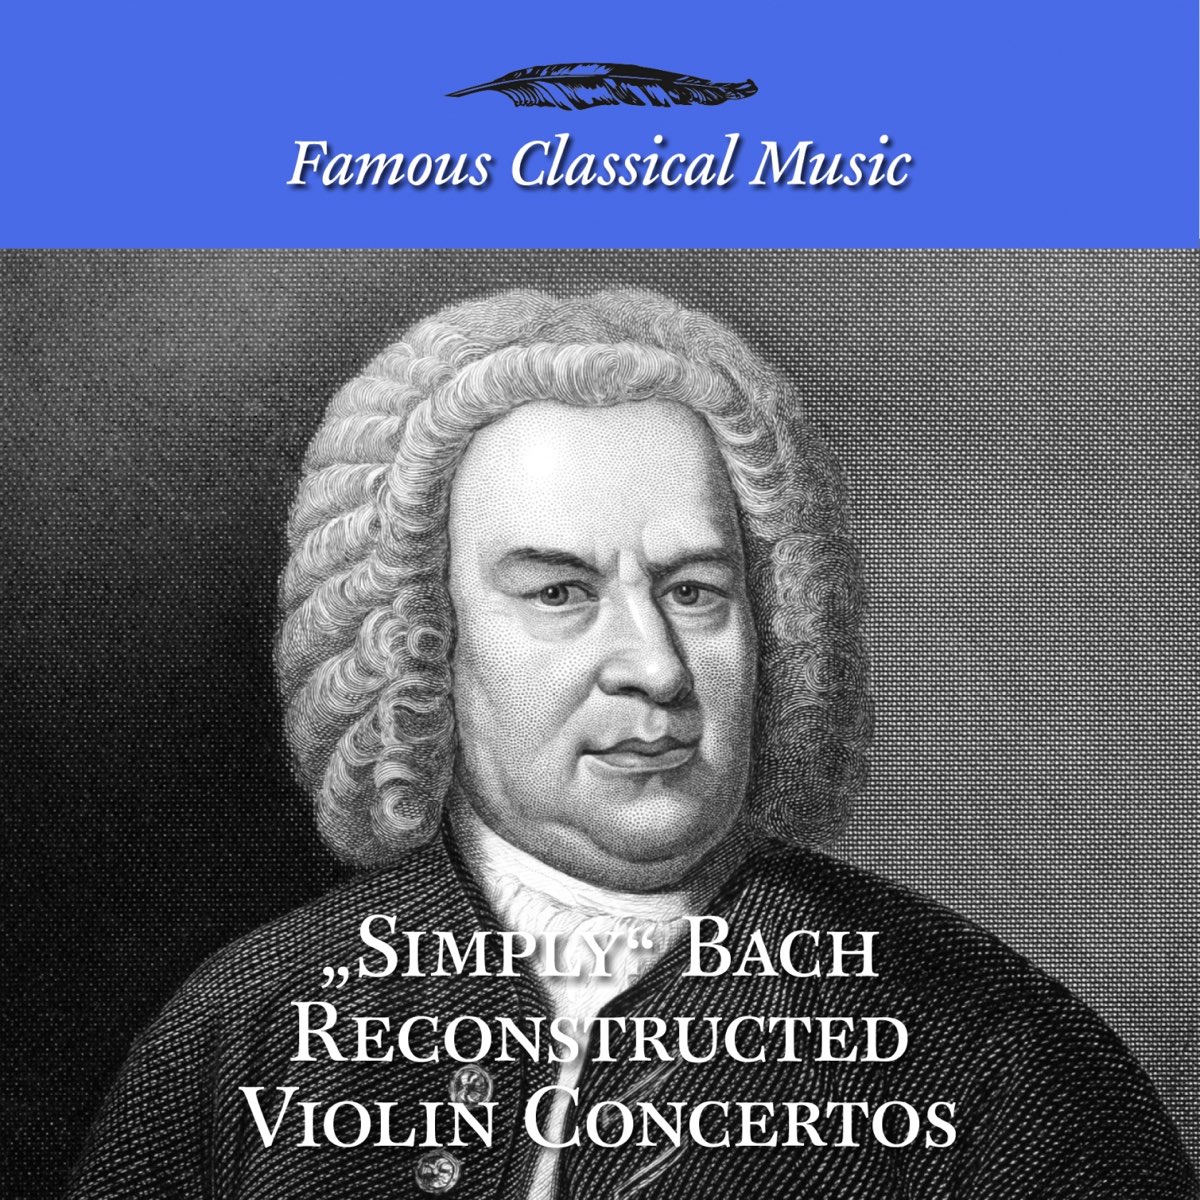 ‎Simply Bach Reconstructed Violin Concertos (Famous Classical Music) by ...